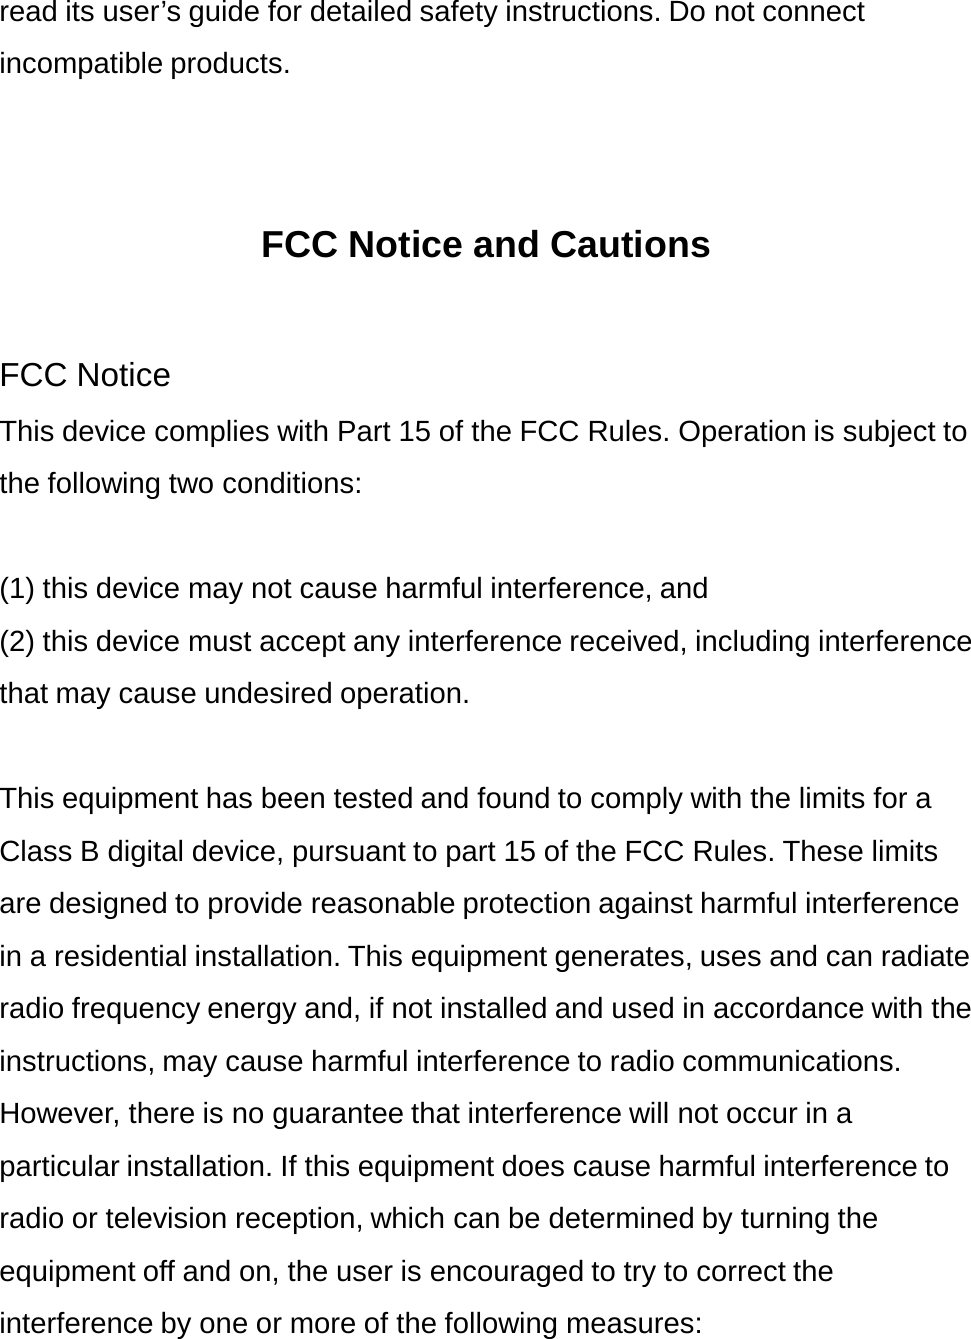 read its user’s guide for detailed safety instructions. Do not connect incompatible products.   FCC Notice and Cautions  FCC Notice This device complies with Part 15 of the FCC Rules. Operation is subject to the following two conditions:  (1) this device may not cause harmful interference, and (2) this device must accept any interference received, including interference that may cause undesired operation.  This equipment has been tested and found to comply with the limits for a Class B digital device, pursuant to part 15 of the FCC Rules. These limits are designed to provide reasonable protection against harmful interference in a residential installation. This equipment generates, uses and can radiate radio frequency energy and, if not installed and used in accordance with the instructions, may cause harmful interference to radio communications. However, there is no guarantee that interference will not occur in a particular installation. If this equipment does cause harmful interference to radio or television reception, which can be determined by turning the equipment off and on, the user is encouraged to try to correct the interference by one or more of the following measures: 